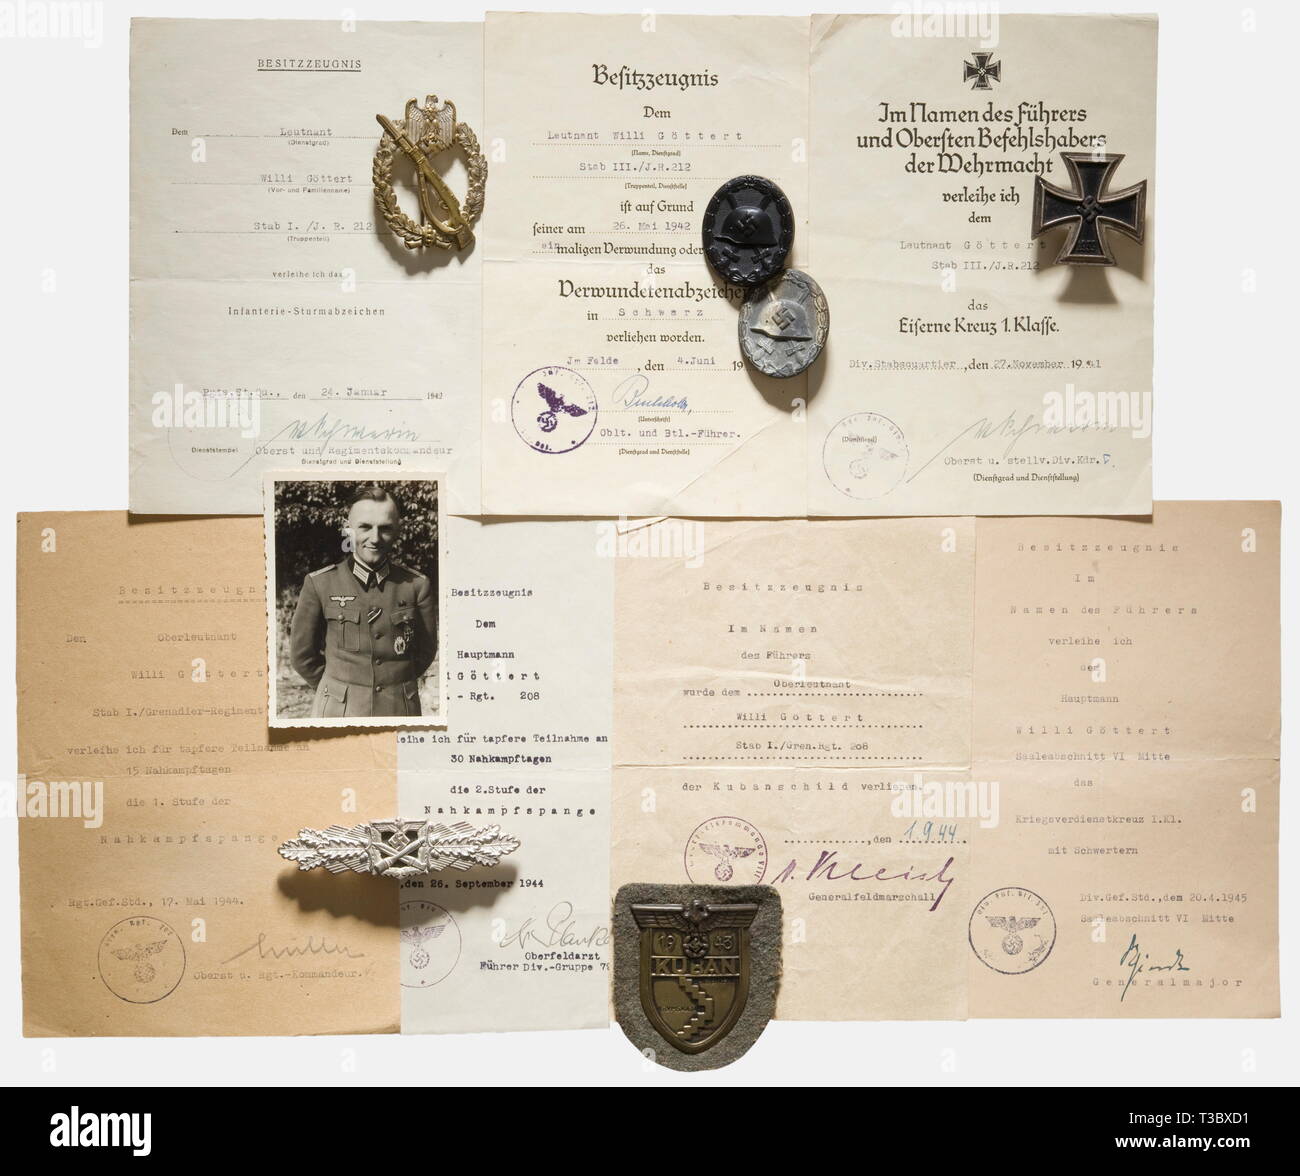 Captain Willi Göttert, decorations and documents German Cross in Gold. Heavy issue with six full rivets and long, slender attachment needle (Nie 7.04.10 f). Chipped, the interior of the award case replaced, with the preliminary possession document dated 14 May 1944. Iron Cross 1st Class of 1939 with award document and transmittal letter, Army Close Combat Clasp in Silver, silvered fine zinc issue of people, 1930s, 1980s, 20th century, 20th century, infantry, military, armed forces, militaria, object, objects, stills, clipping, clippings, cut out, cut-out, cut-outs, document, Editorial-Use-Only Stock Photo